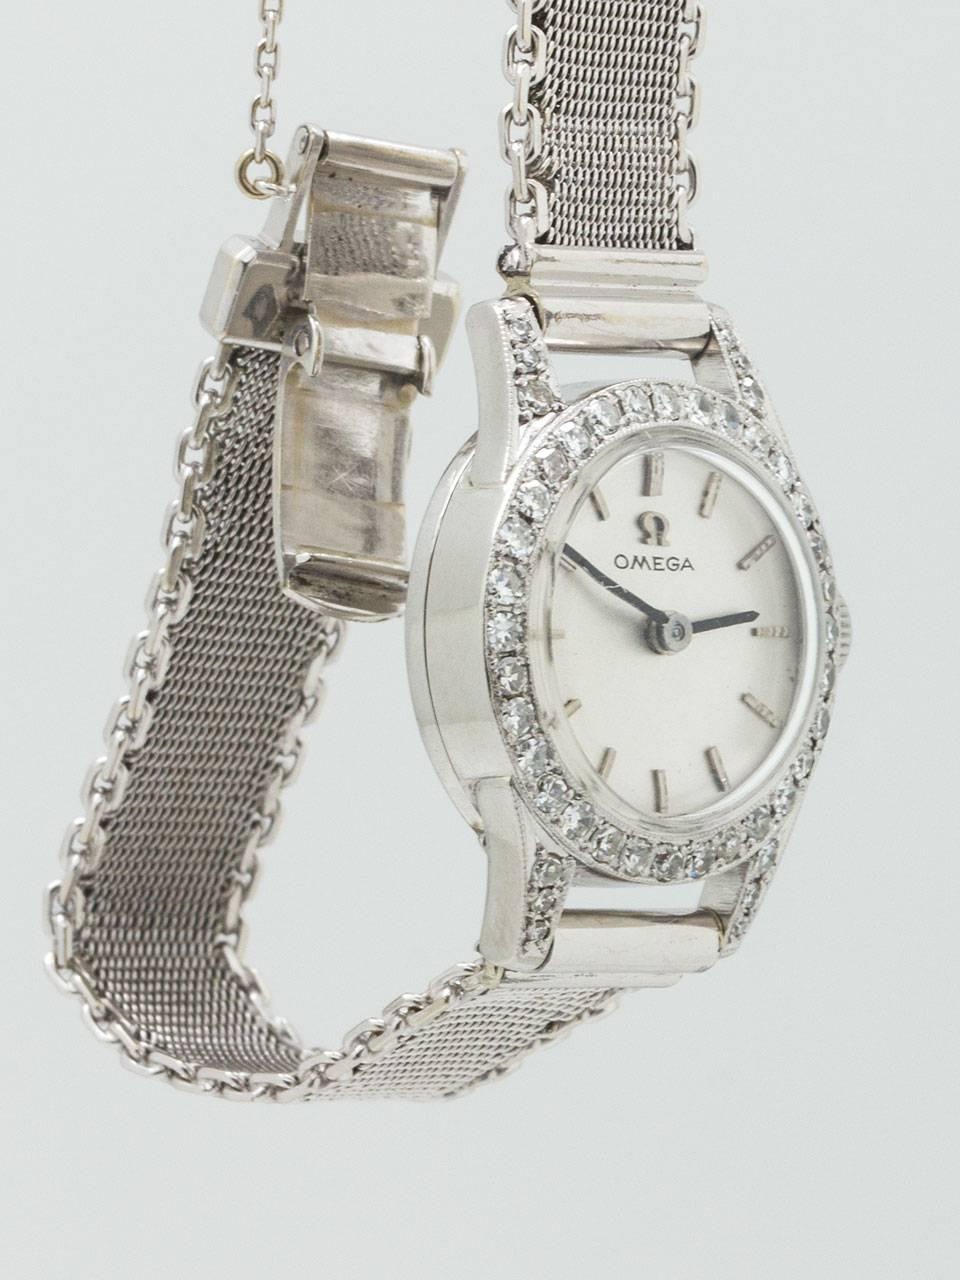 Omega Platinum and Diamond Dress Wristwatch circa 1950’s.  Petite and very pretty design 19 x 25mm round case with extended lugs all pave set with single cut diamonds. Very pleasing silver satin dial with raised silver indexes and silver baton